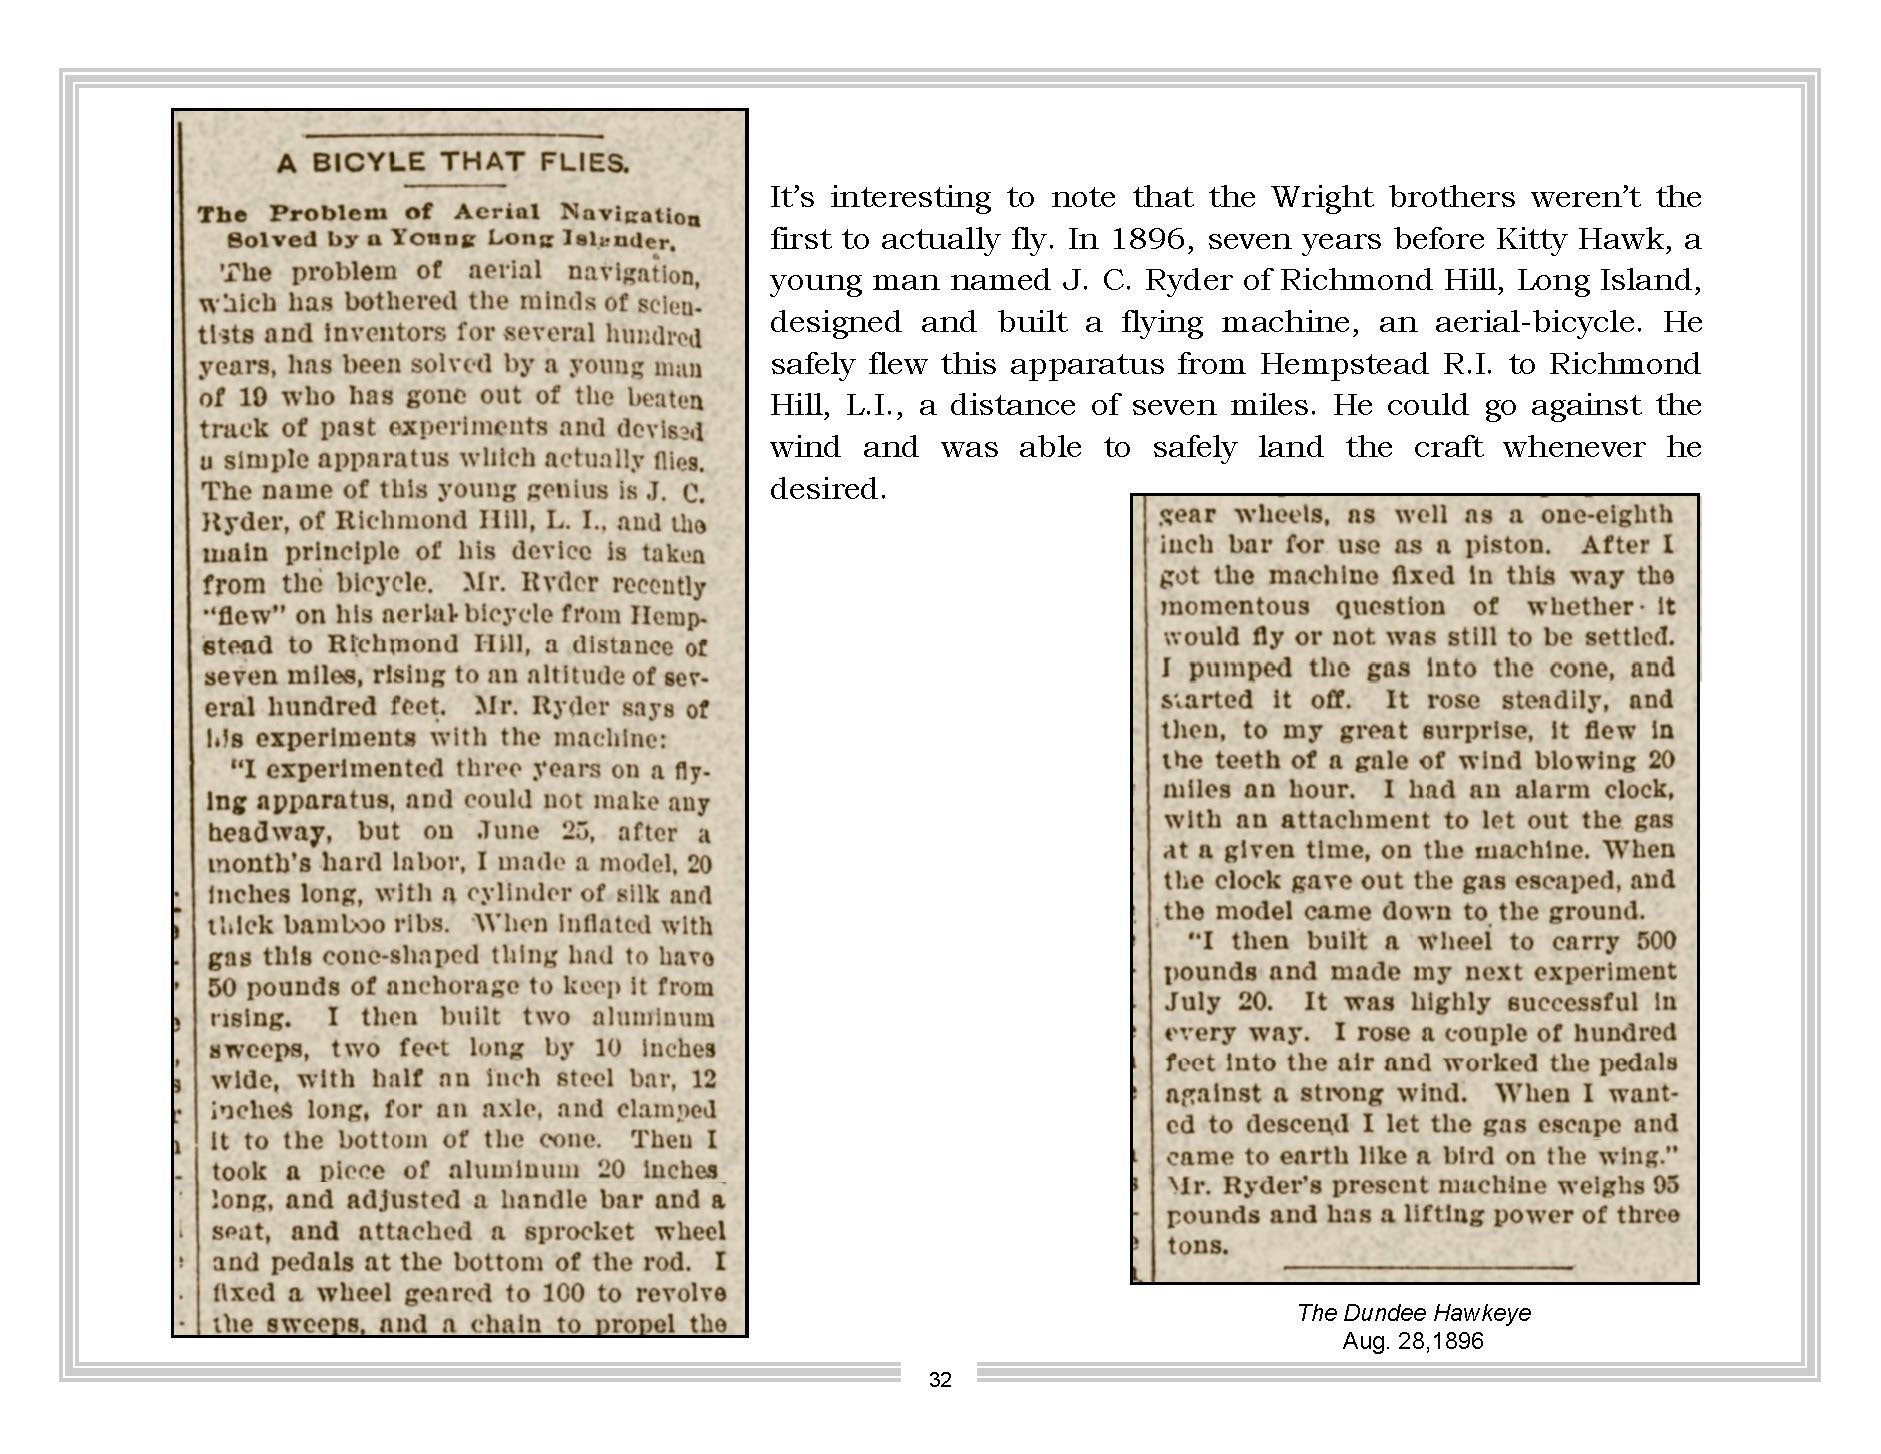 Book - The History of the Bicycle_Page_32.jpg